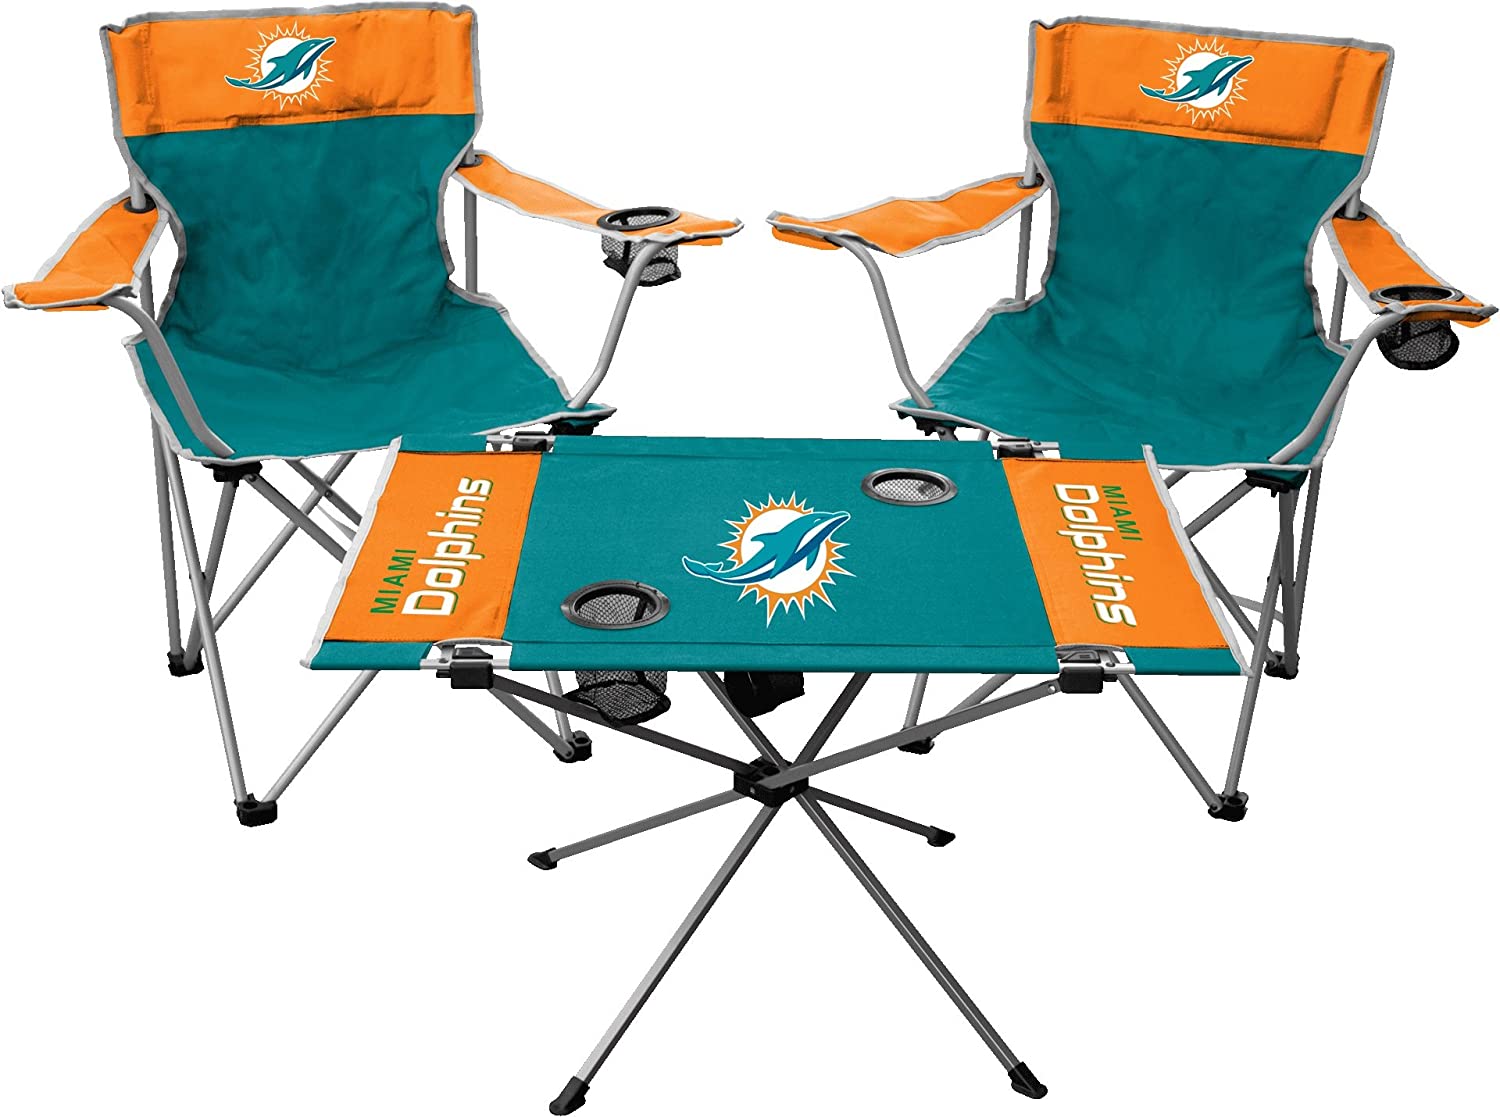 Miami Dolphins NFL 3-Piece Tailgate Kit from Amazon